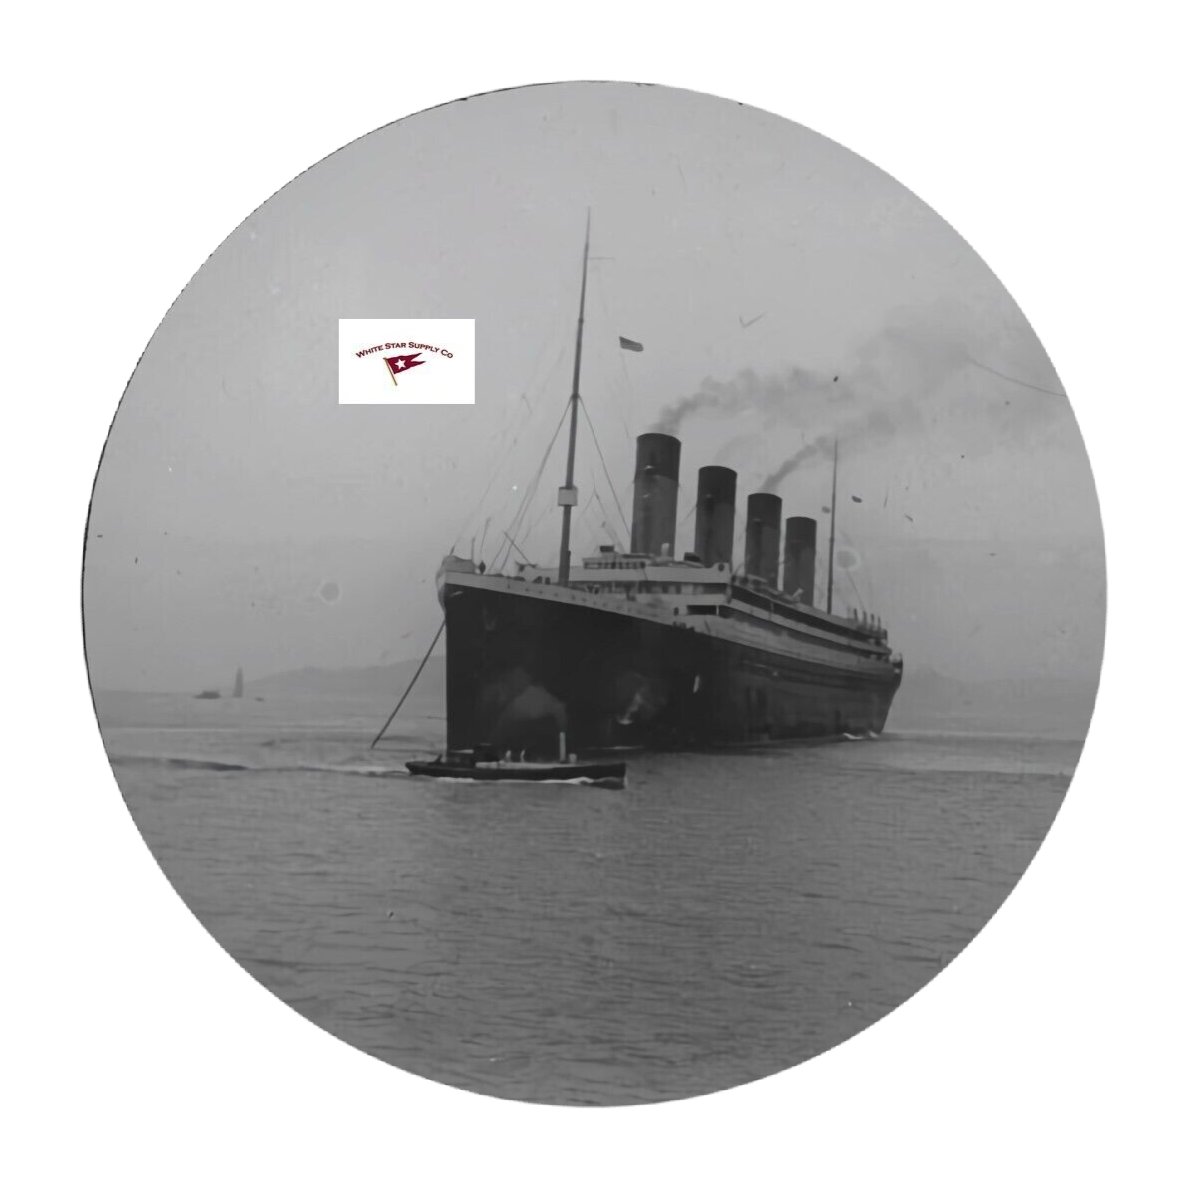 On the morning of 20th April 1912, Olympic (#Titanic's sister) called at Plymouth. It's her first port of call since the sinking of Titanic, her sister ship, five days earlier. Her flags can be seen flying at half mast.
#Titanic112 #RMSTitanic #Titanic2024 #TitanicTimeline